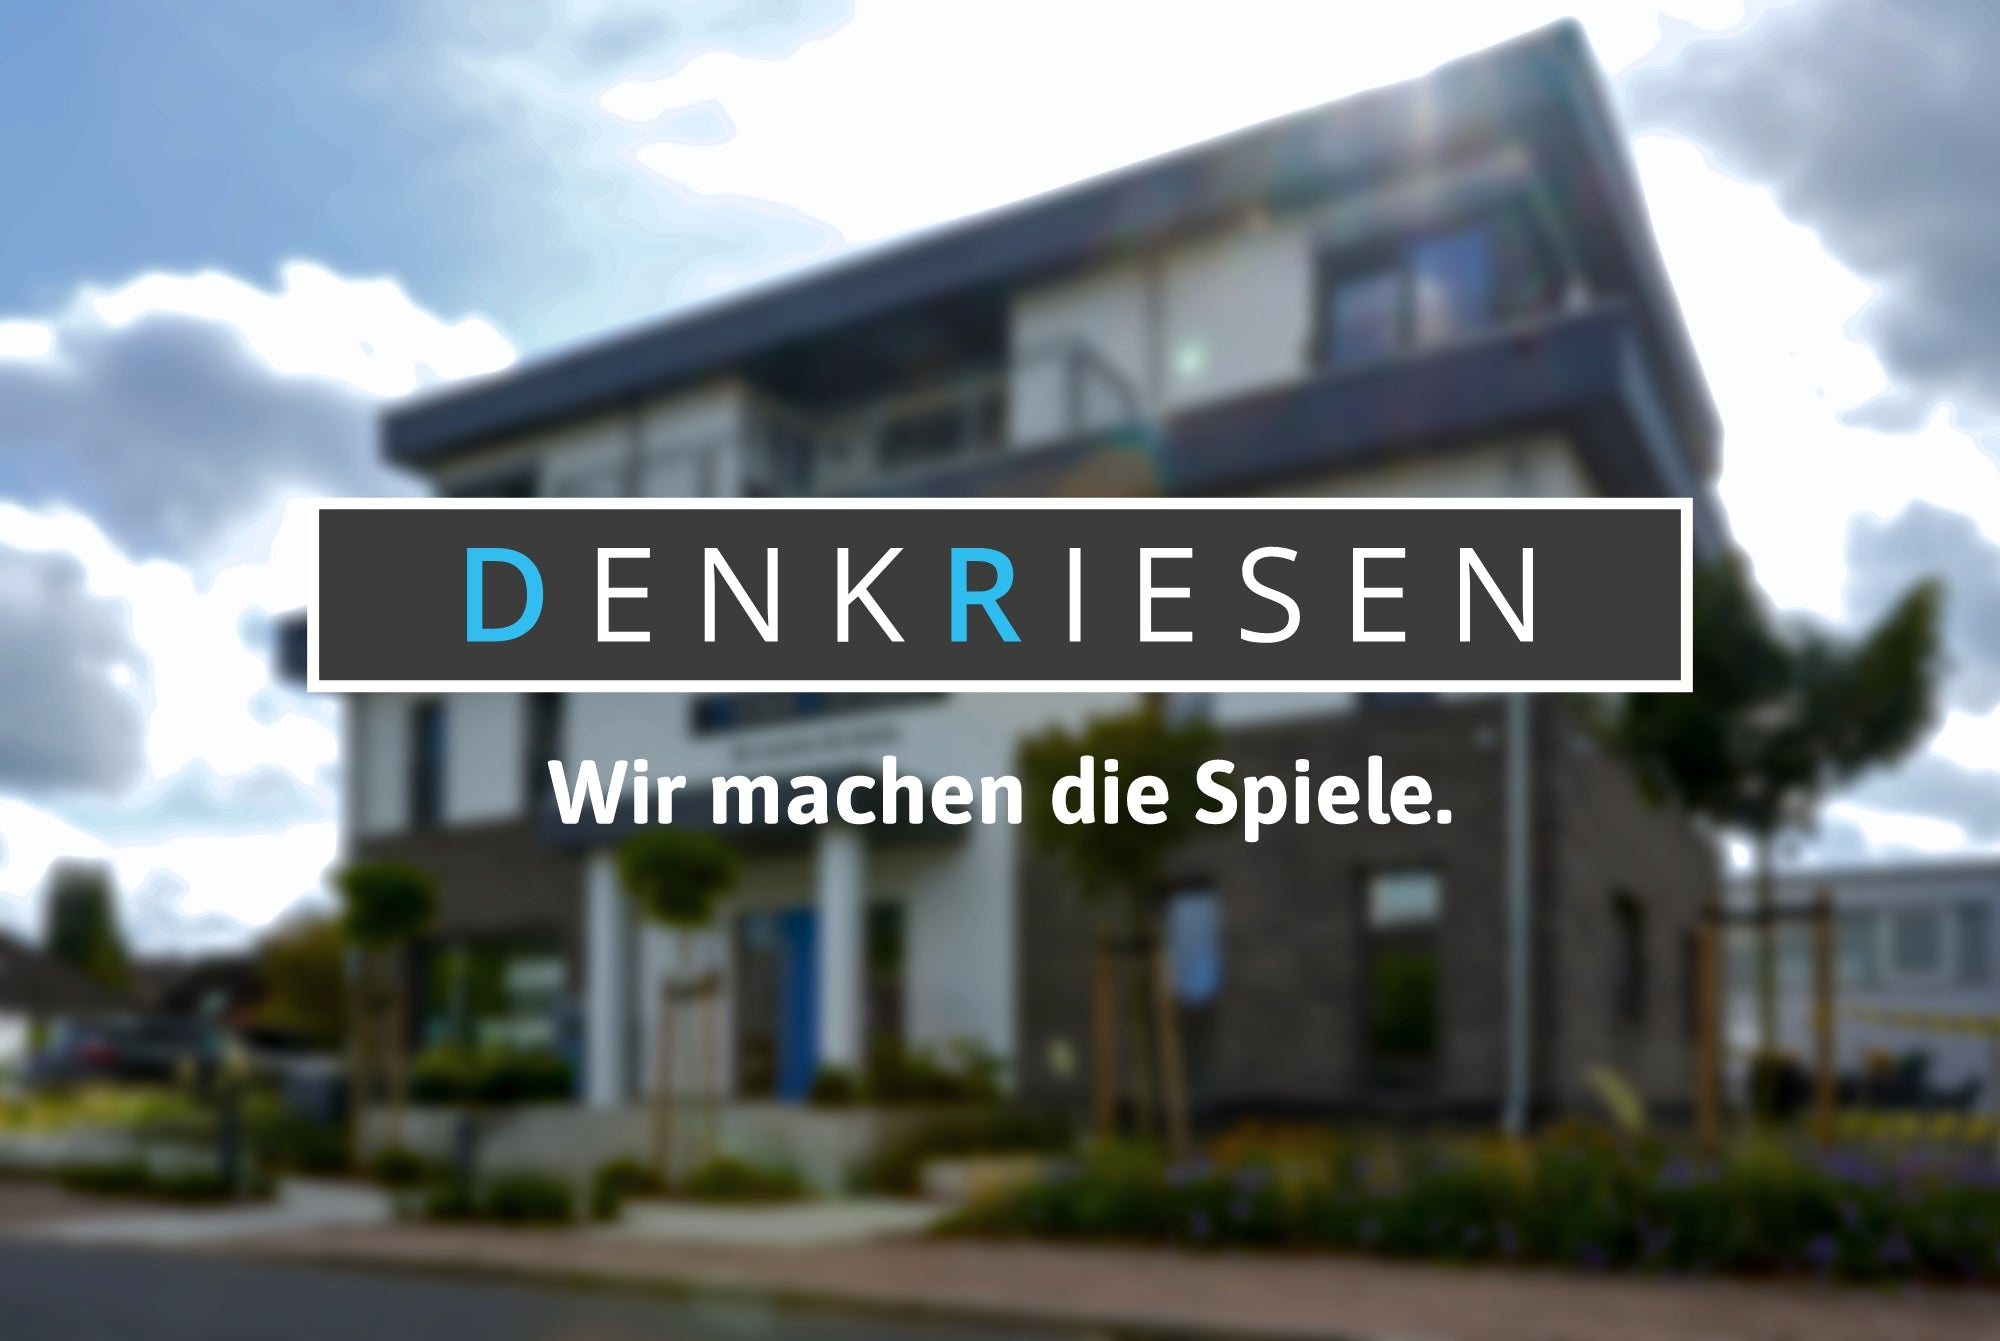 Unser neues Image-Video!